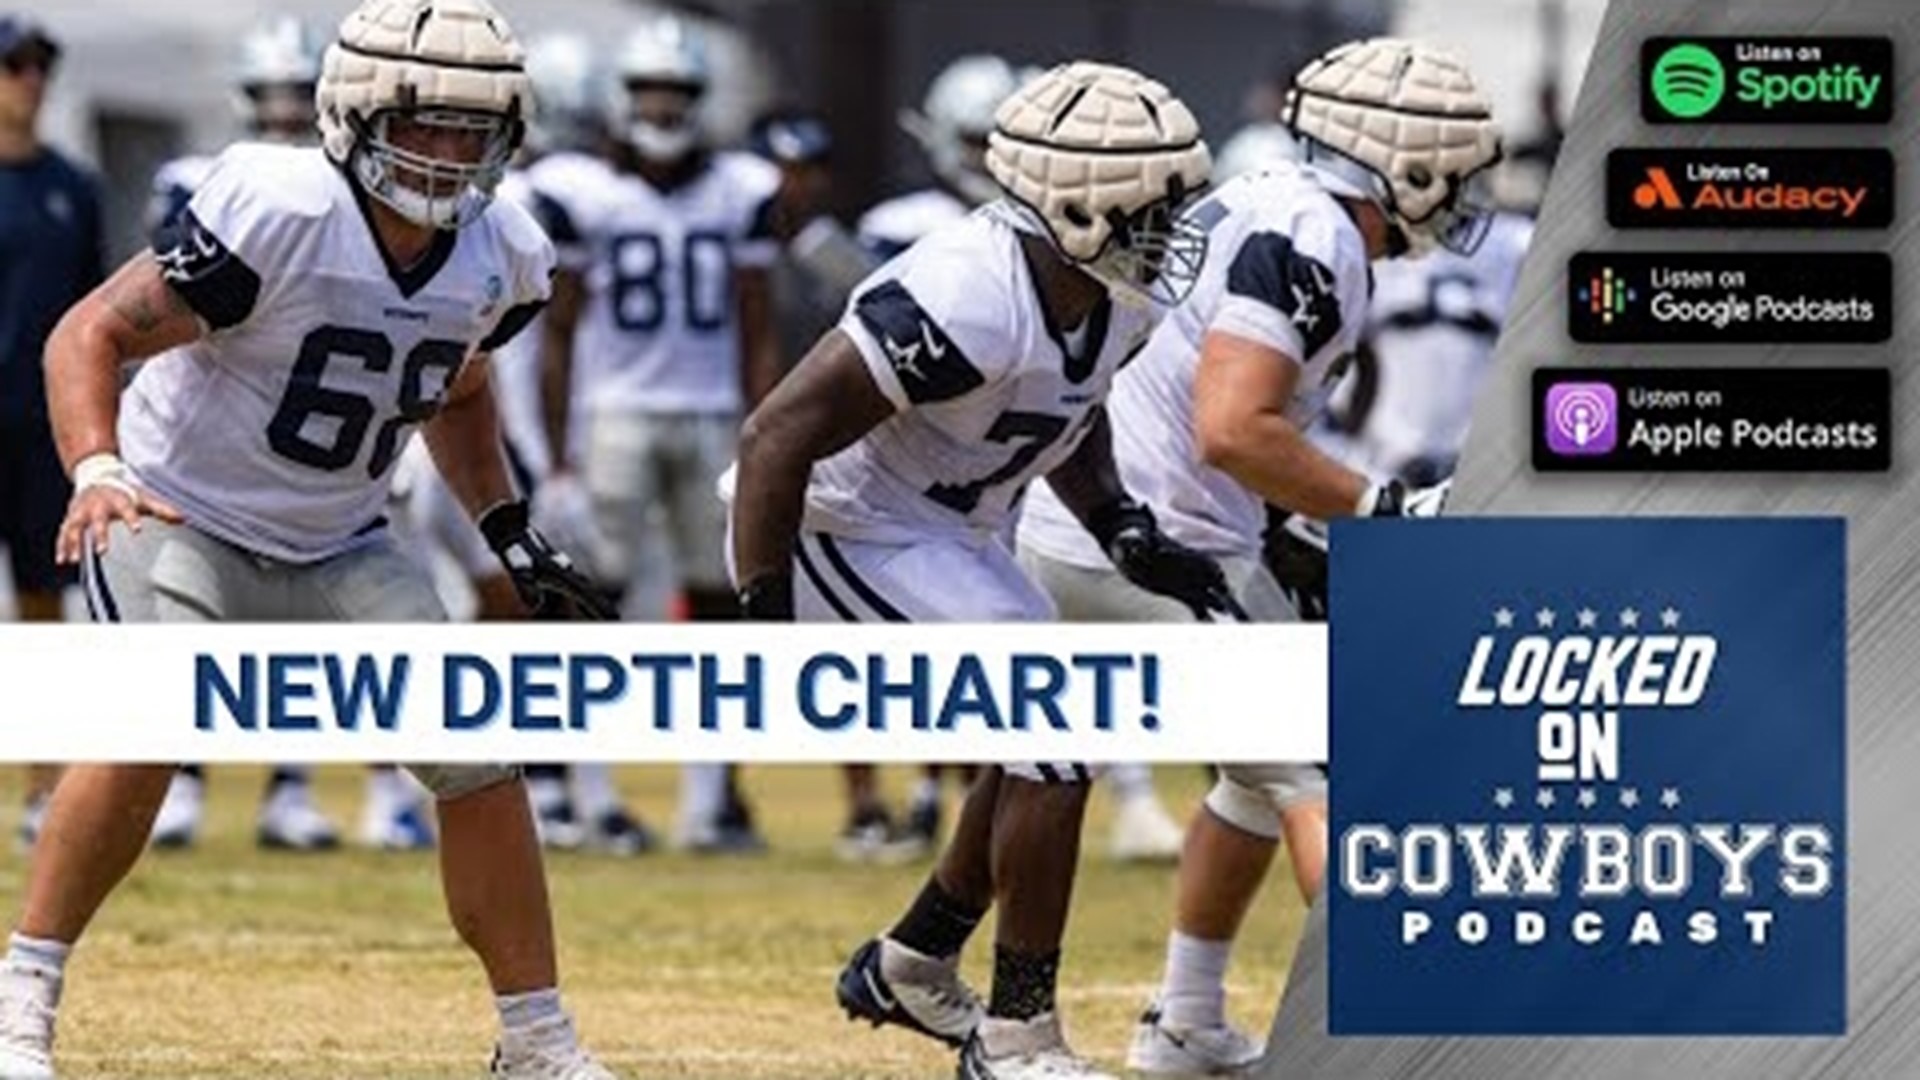 Marcus Mosher and Landon McCool discuss the Dallas Cowboys releasing their first (unofficial) depth chart of the year.